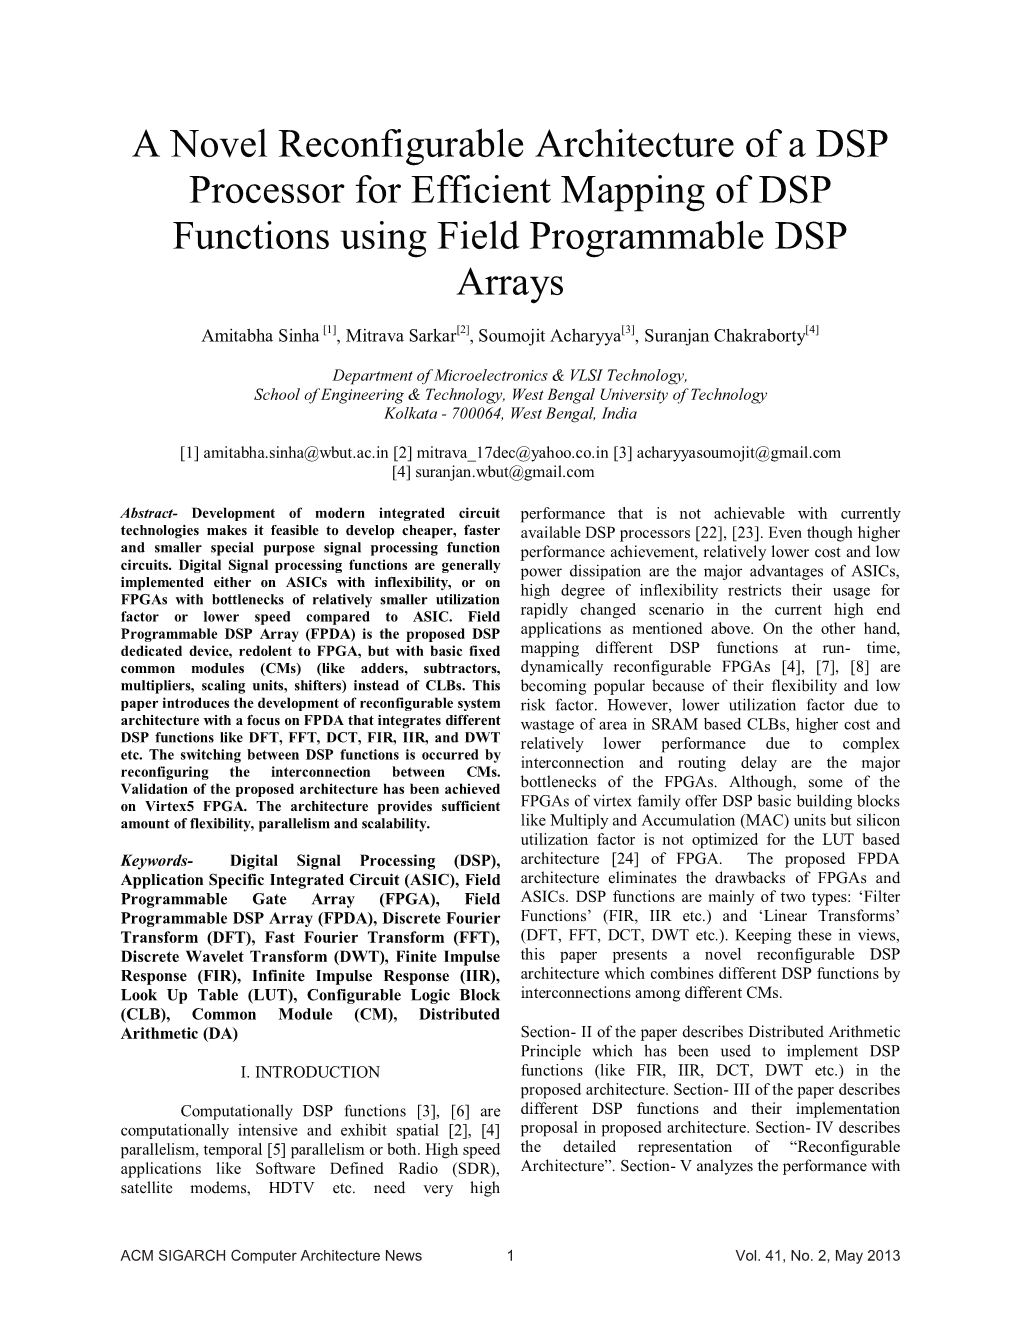 A Novel Reconfigurable Architecture of a DSP Processor for Efficient Mapping of DSP Functions Using Field Programmable DSP Arrays